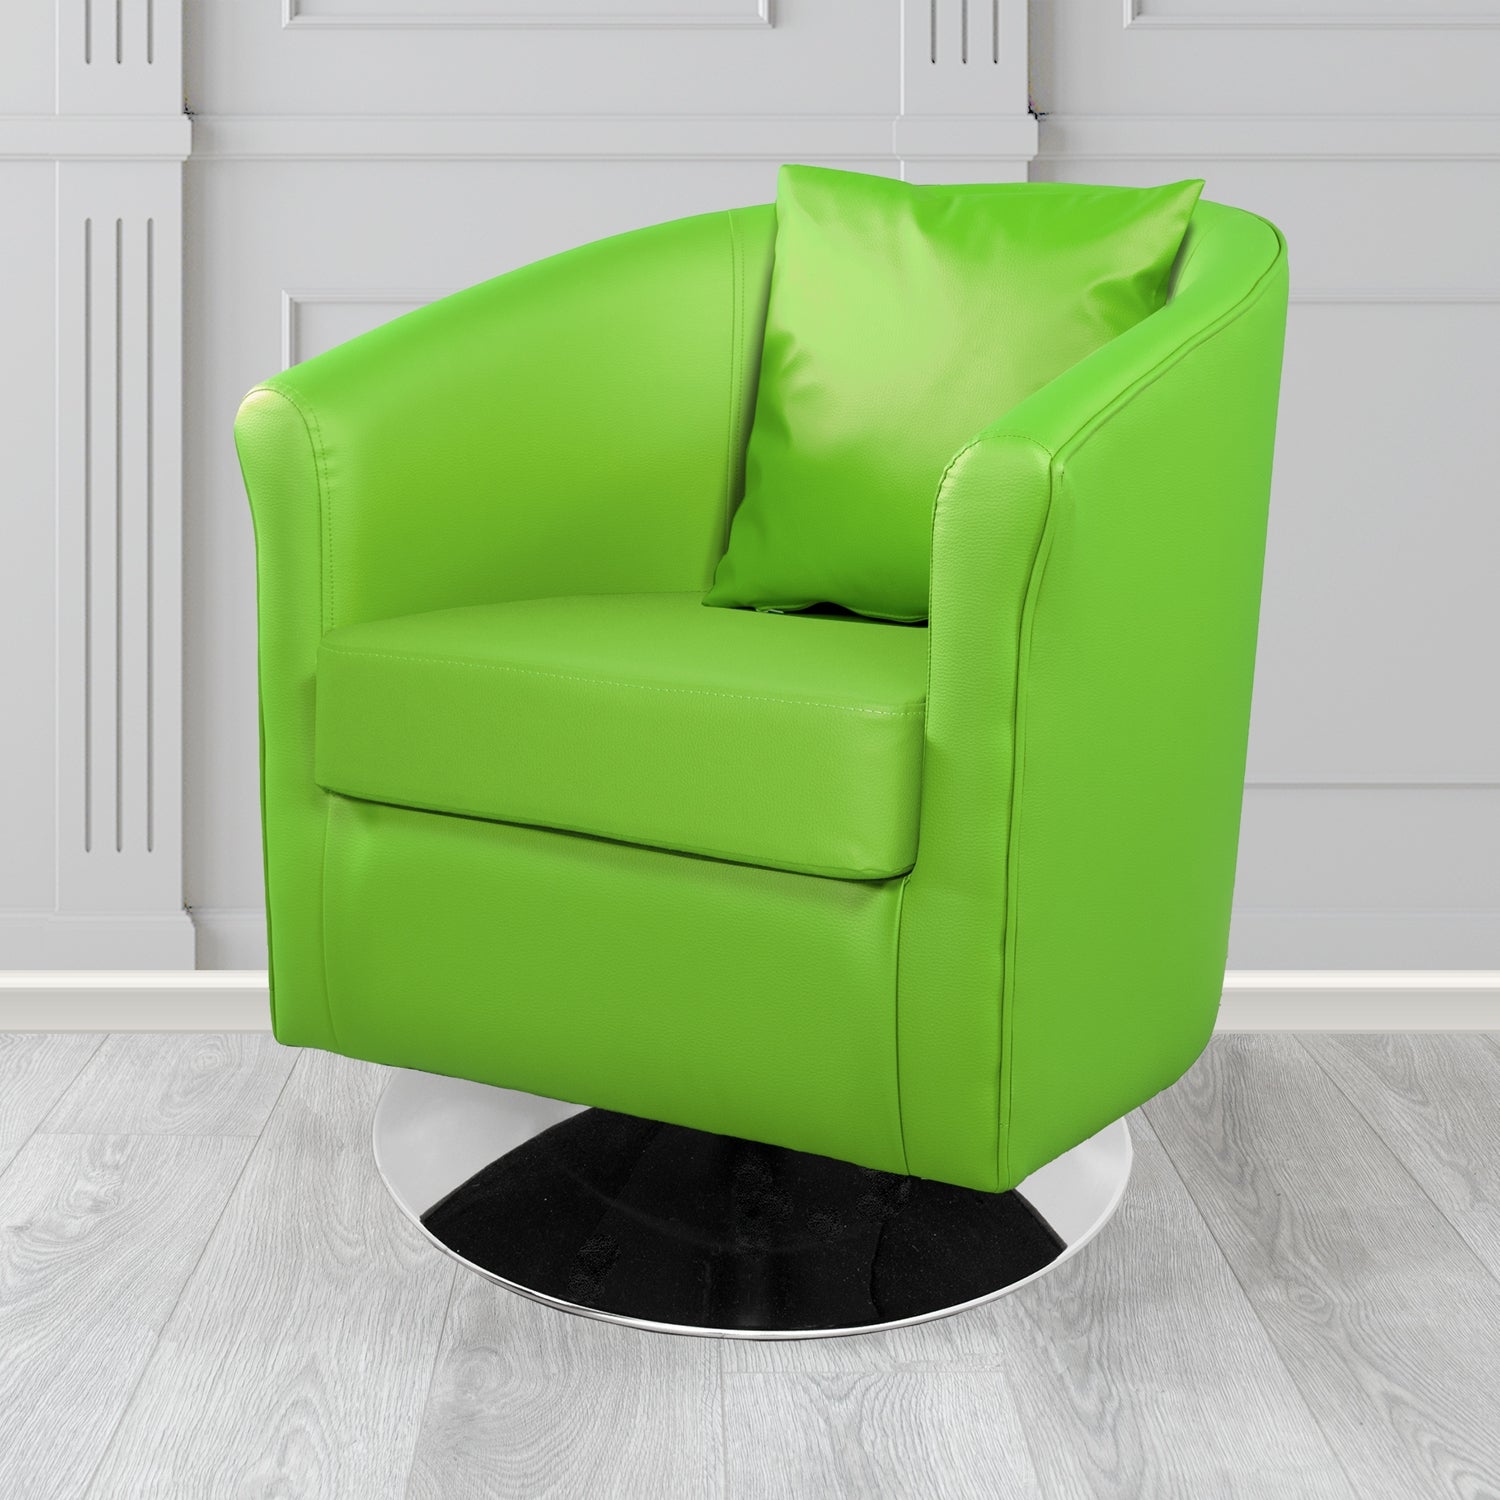 St Tropez Swivel Tub Chair with Scatter Cushion in Madrid Lime Faux Leather - The Tub Chair Shop